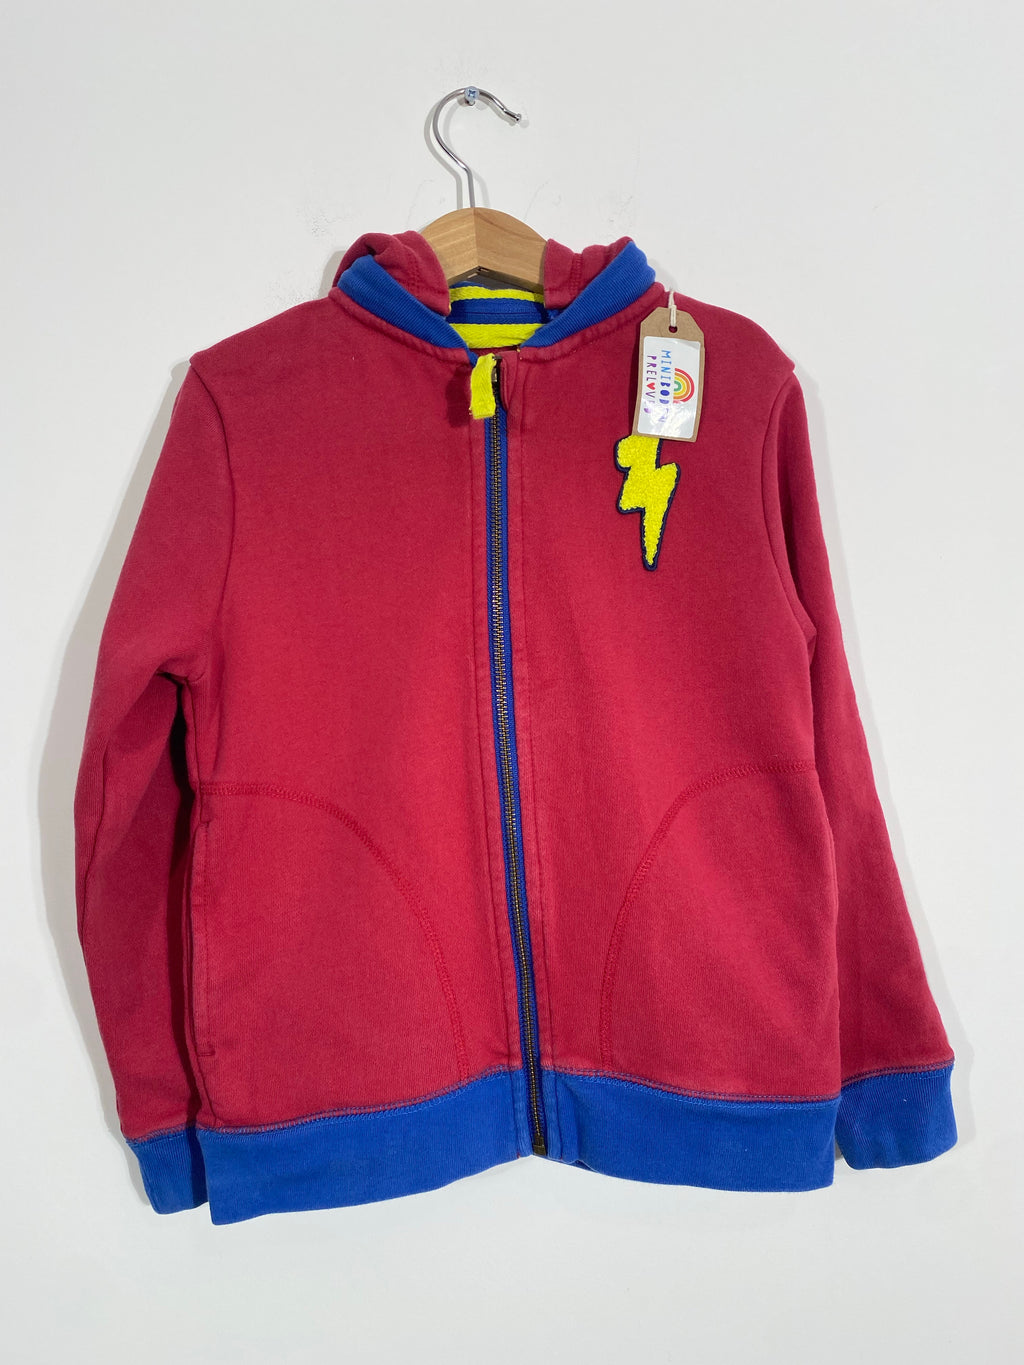 Lovely Lightning Bolt Red Zip Up Hoodie (7-8 Years)